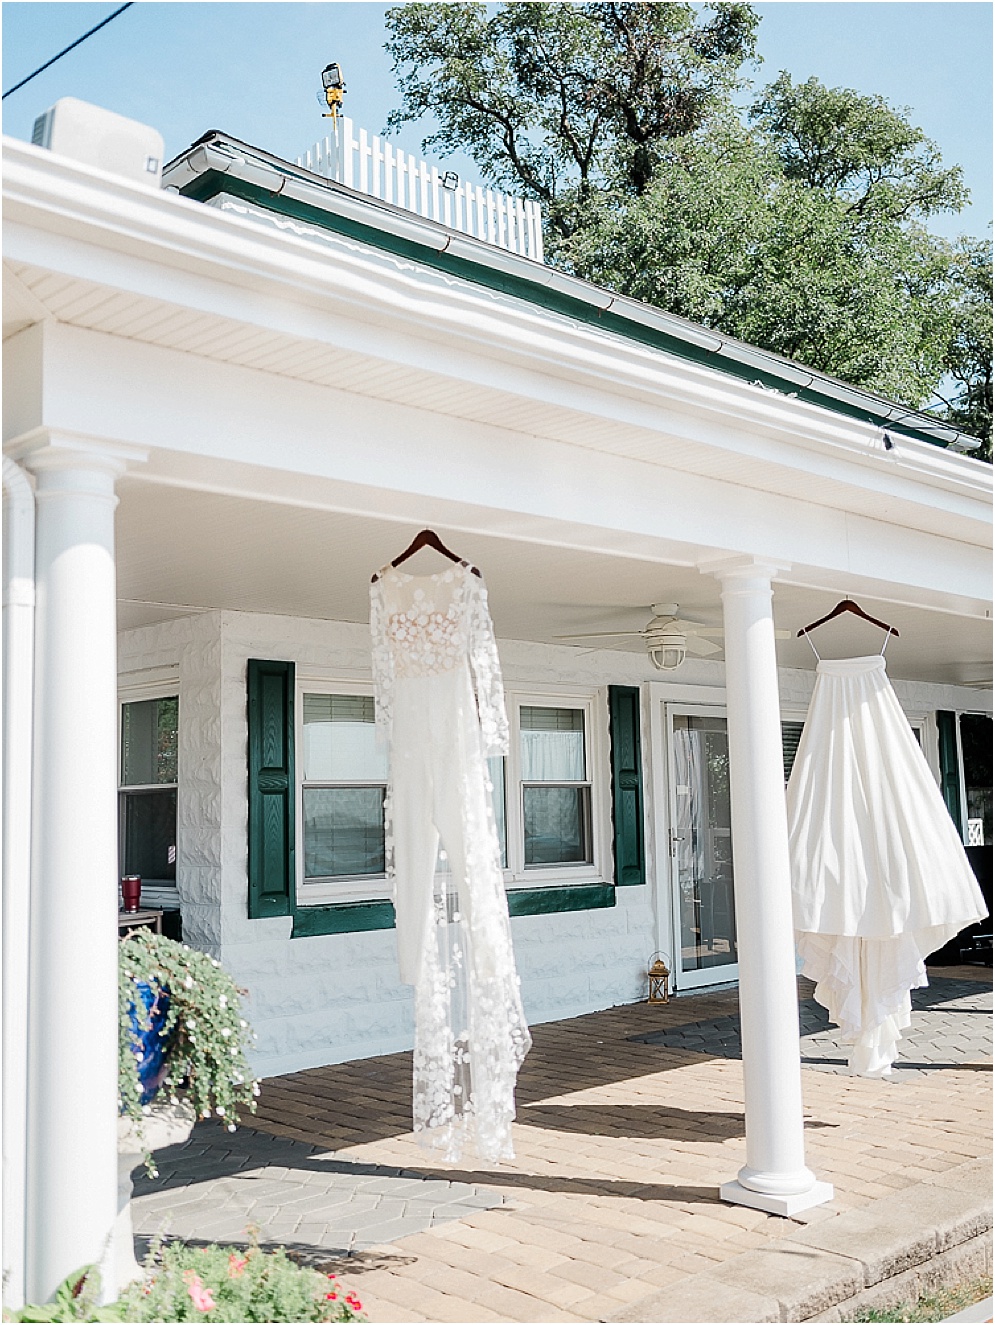 A playful Annapolis backyard wedding on the water featuring twinkle lights and greenery.